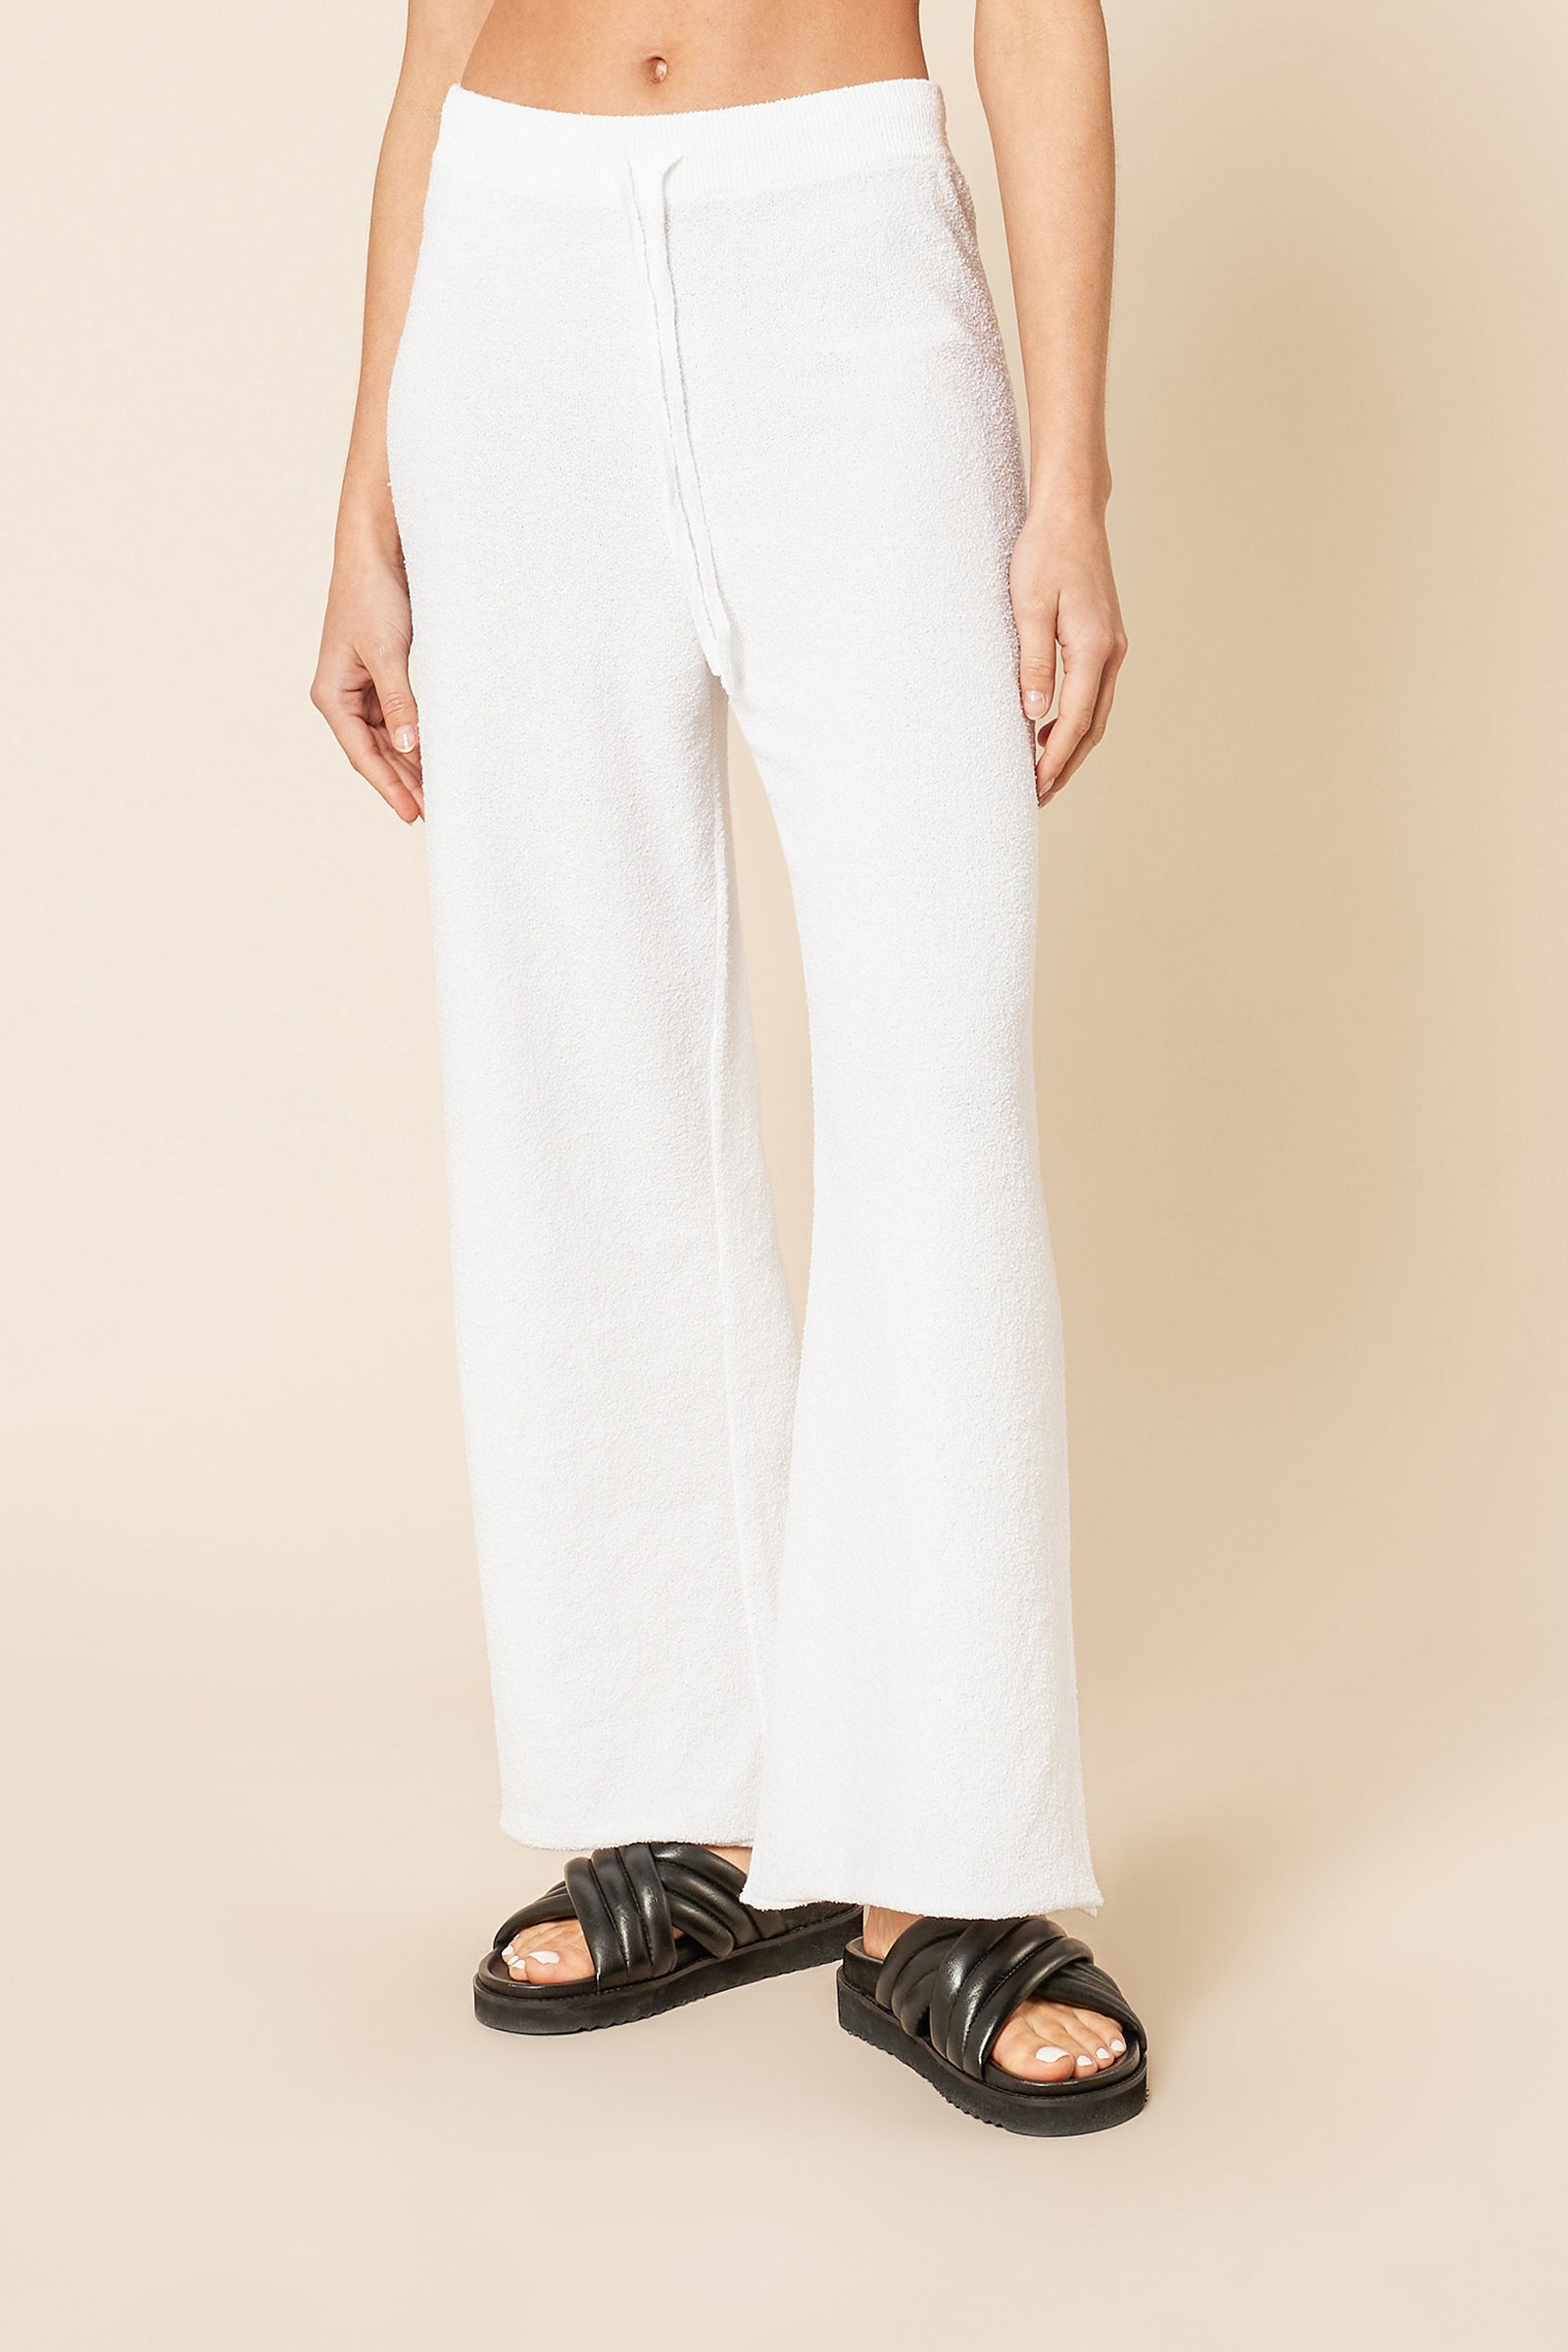 Nude Lucy Binx Knit Pant in White